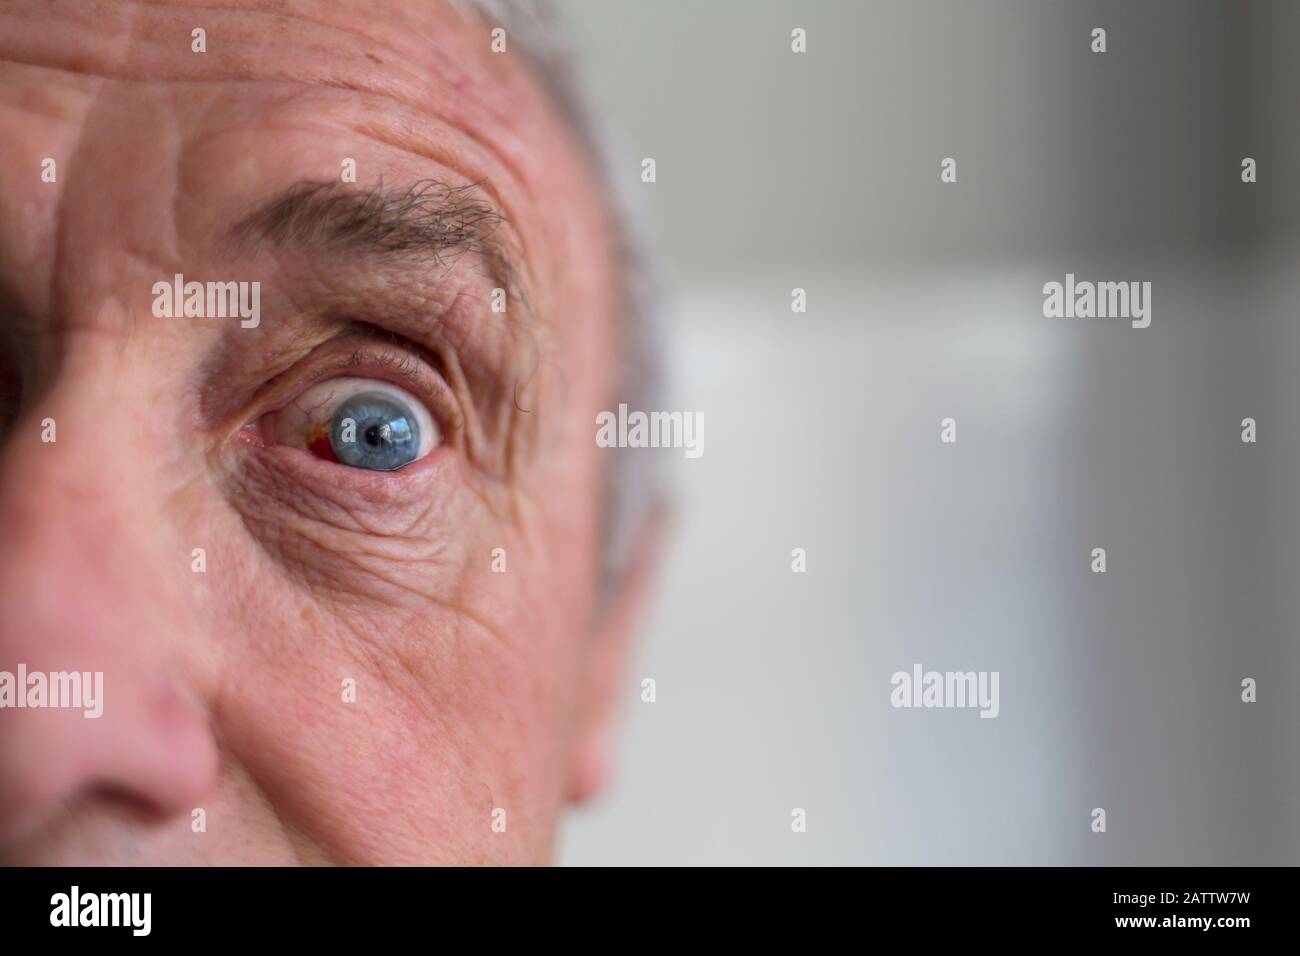 A man’s eye opened wide in surprise. Stock Photo